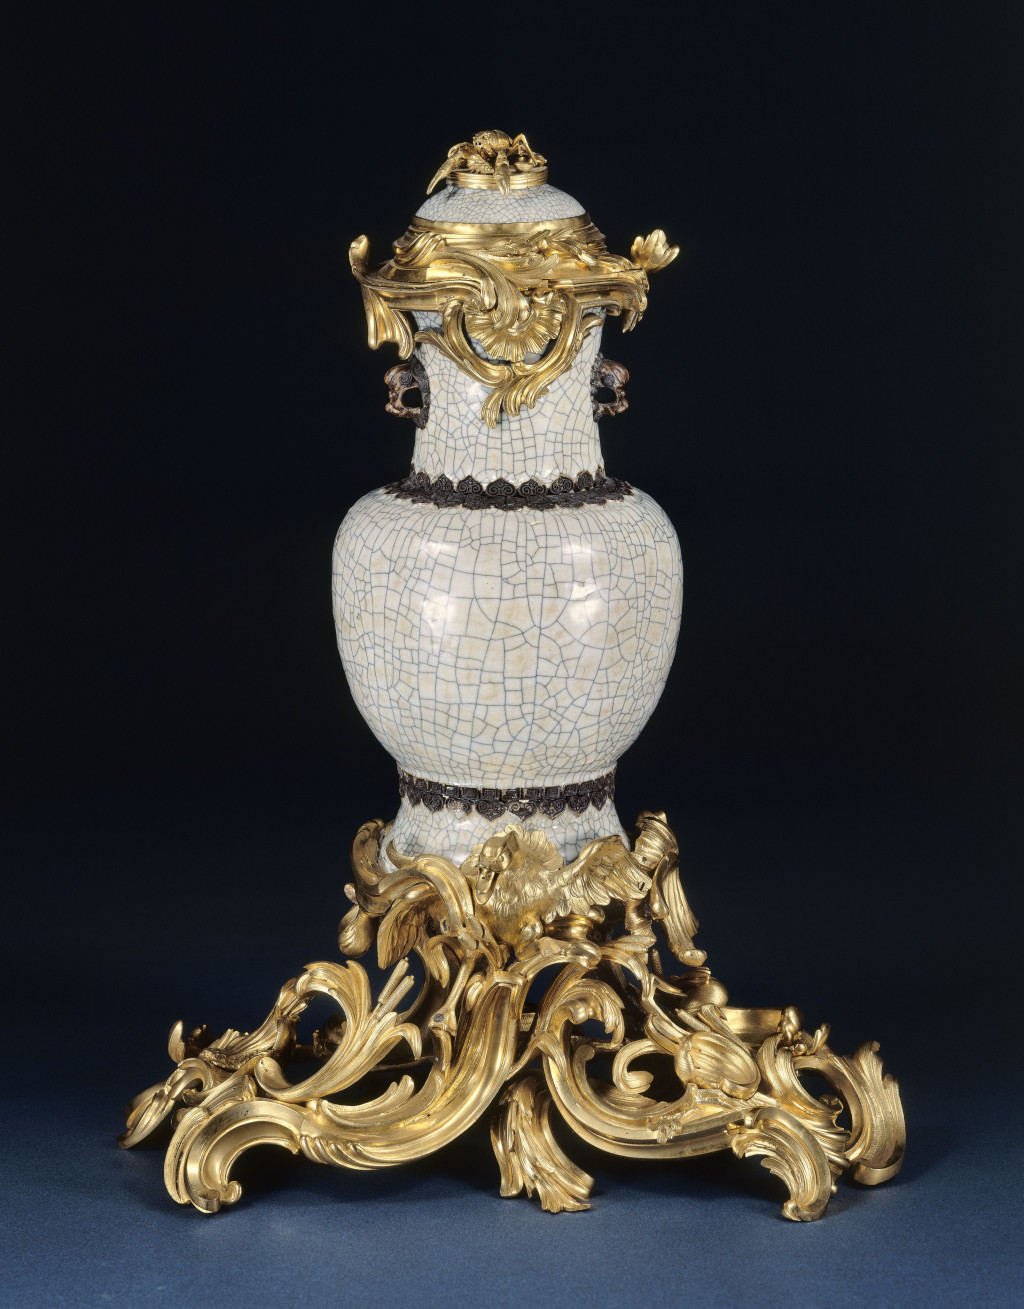 Photograph of a porcelain vase mounted in golden bronze